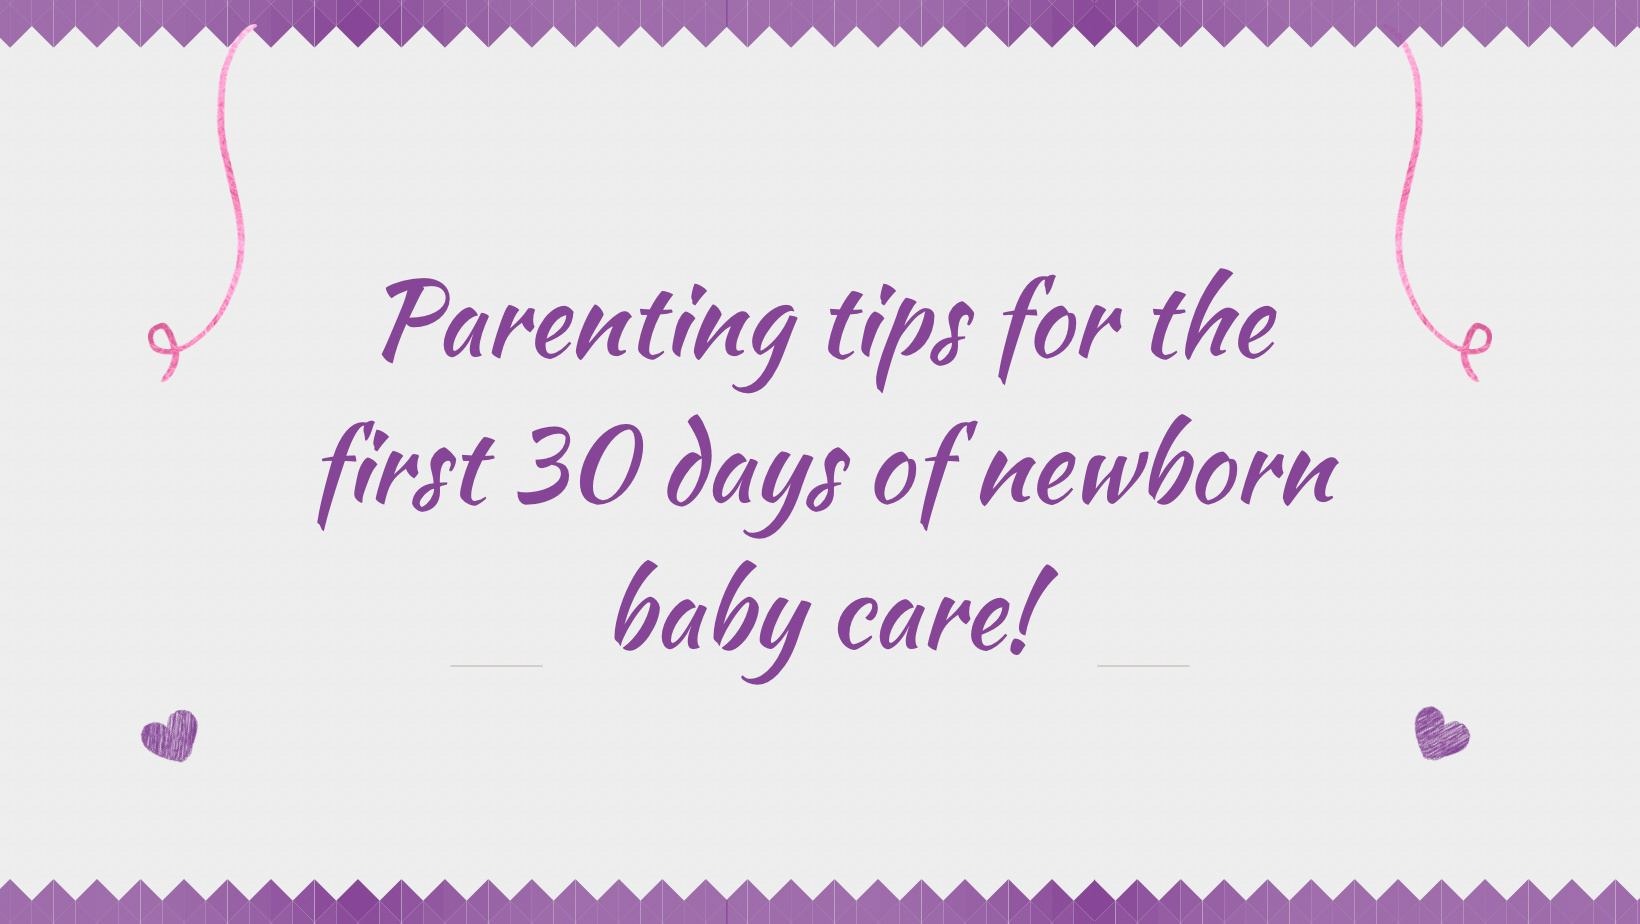 Parenting tips for the first 30 days of newborn baby care!